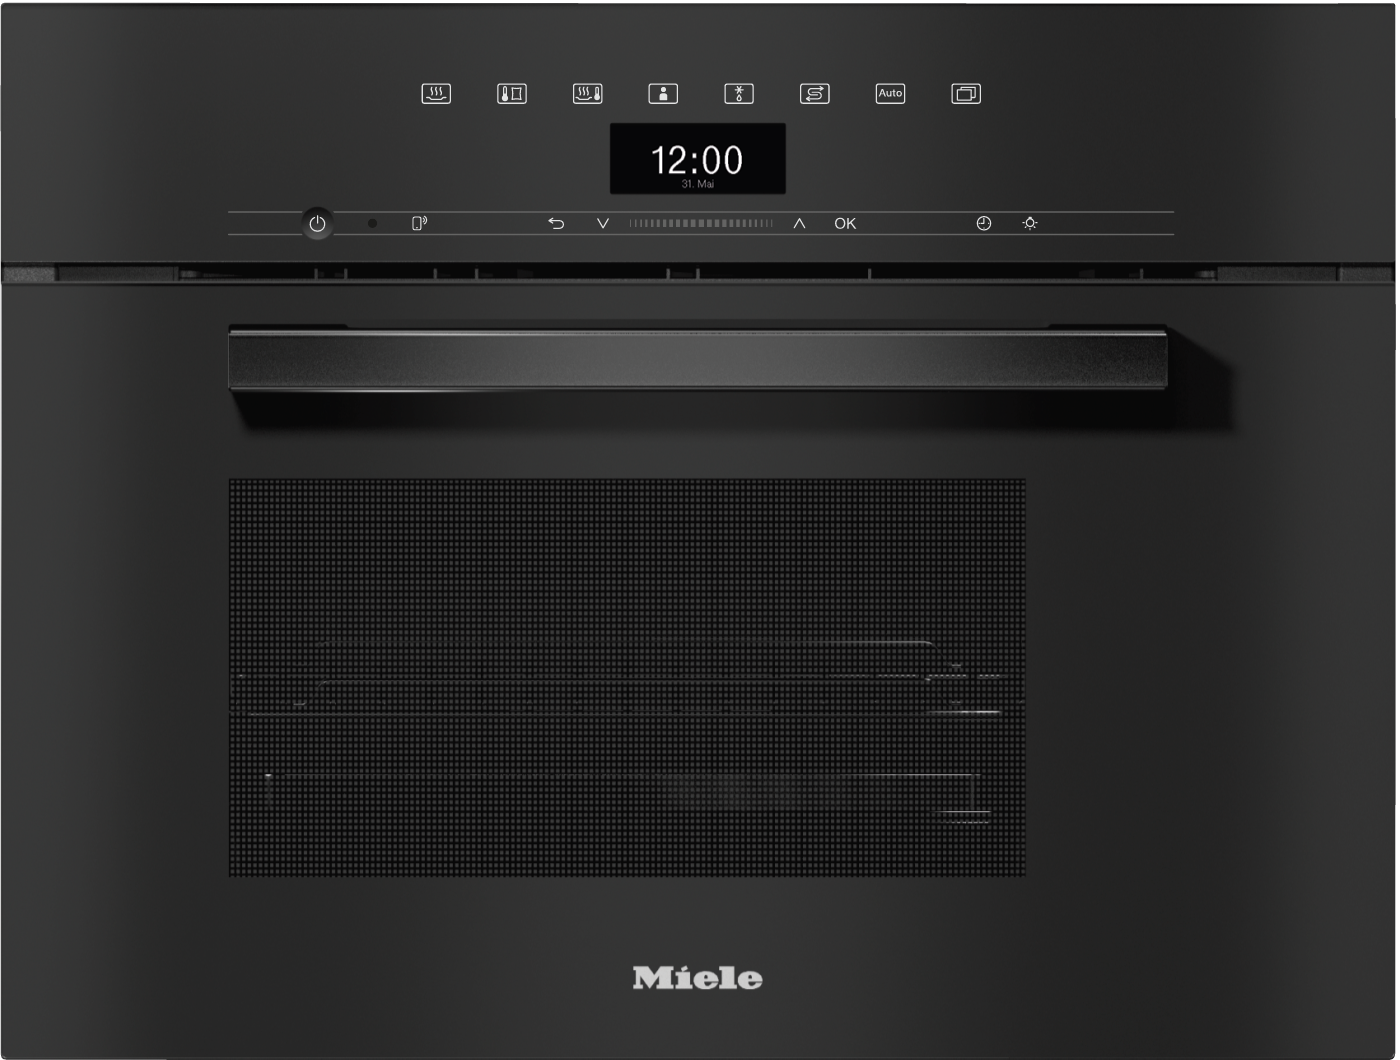 DG 7440Built-in steam oven for healthy cooking with automatic programmes, networking and sous-vide cooking.